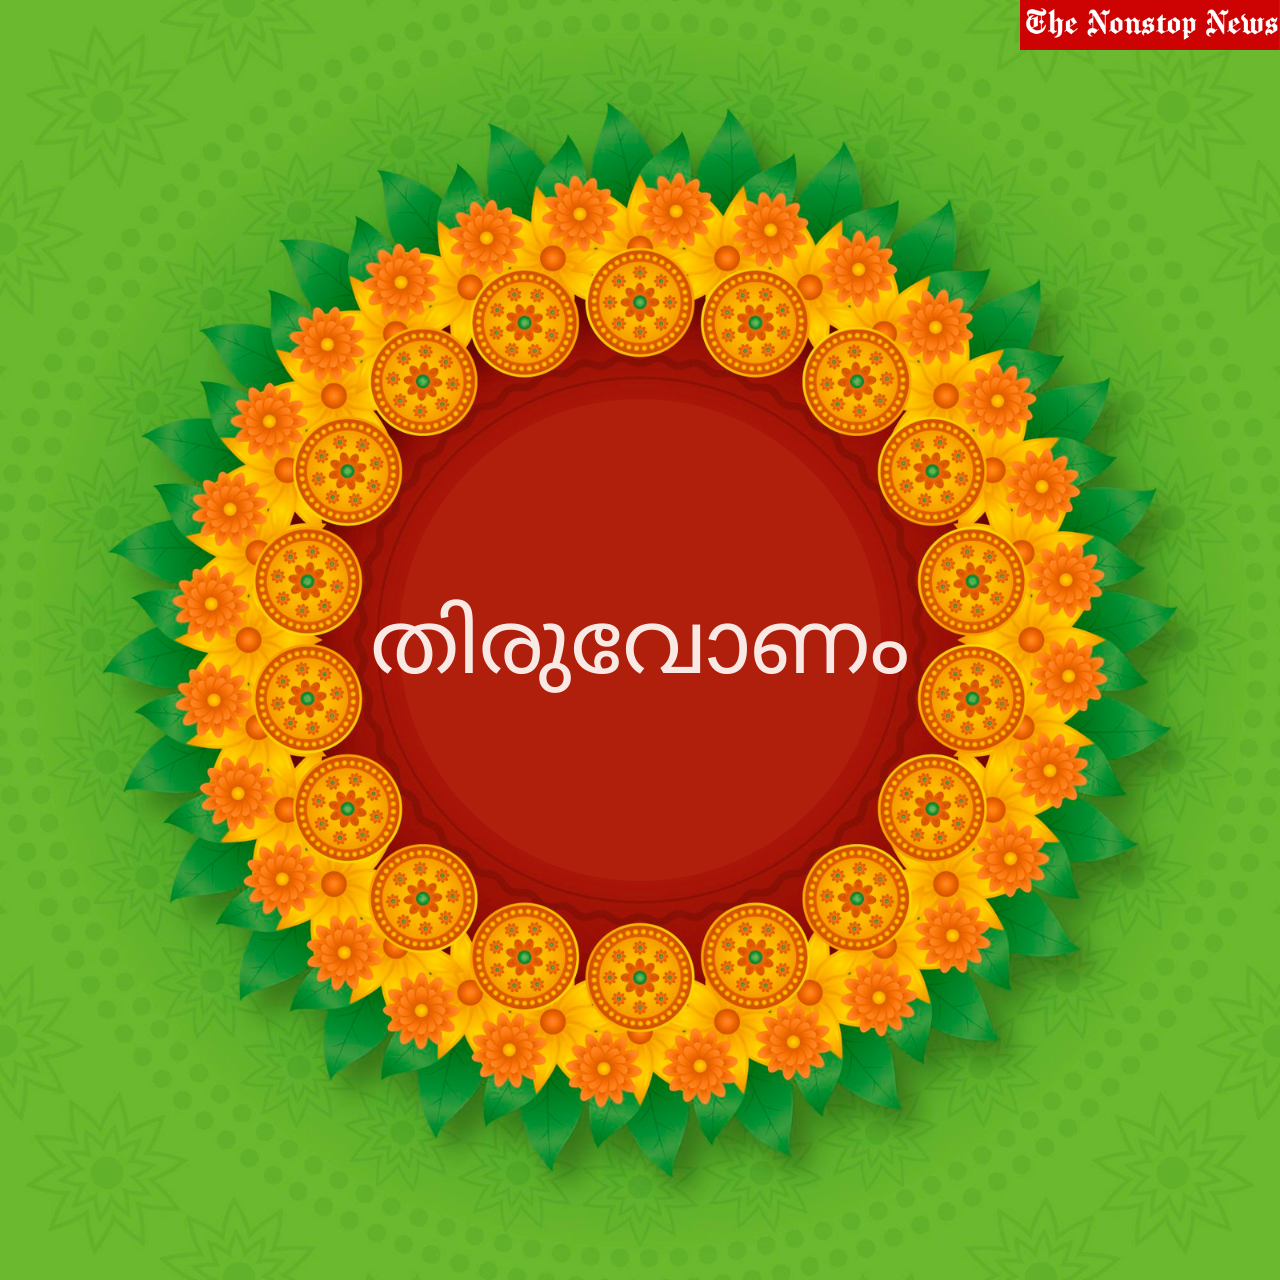 Thiruvonam 2022: Malayalam Greetings, Quotes, Wishes, Images, Messages, Posters and Banners to greet your loved ones